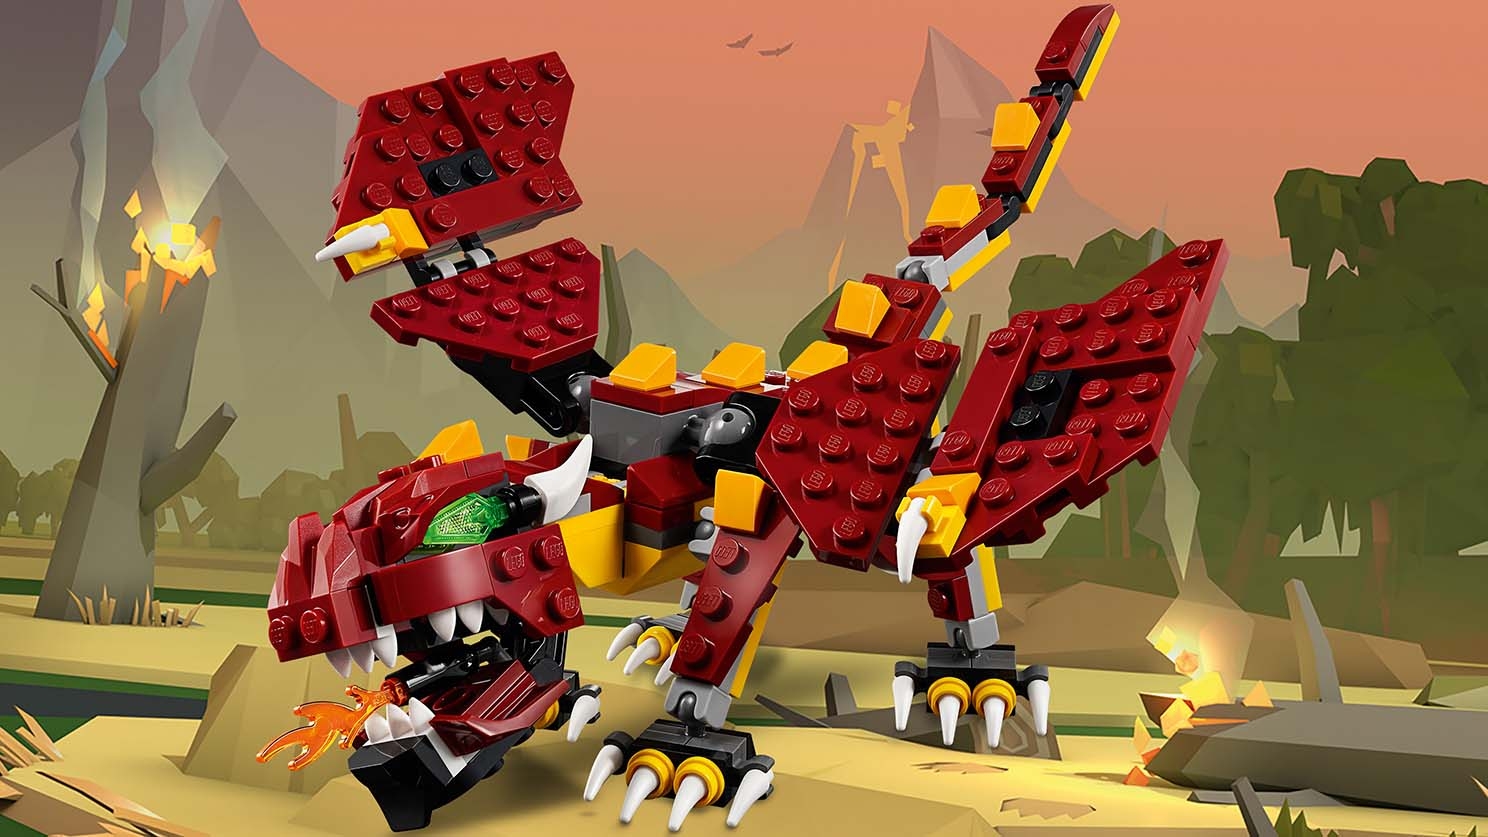  LEGO Creator 3 in 1 - 31073 Mythical Creatures - This big red dragon spits fire and sets the forest on fire.